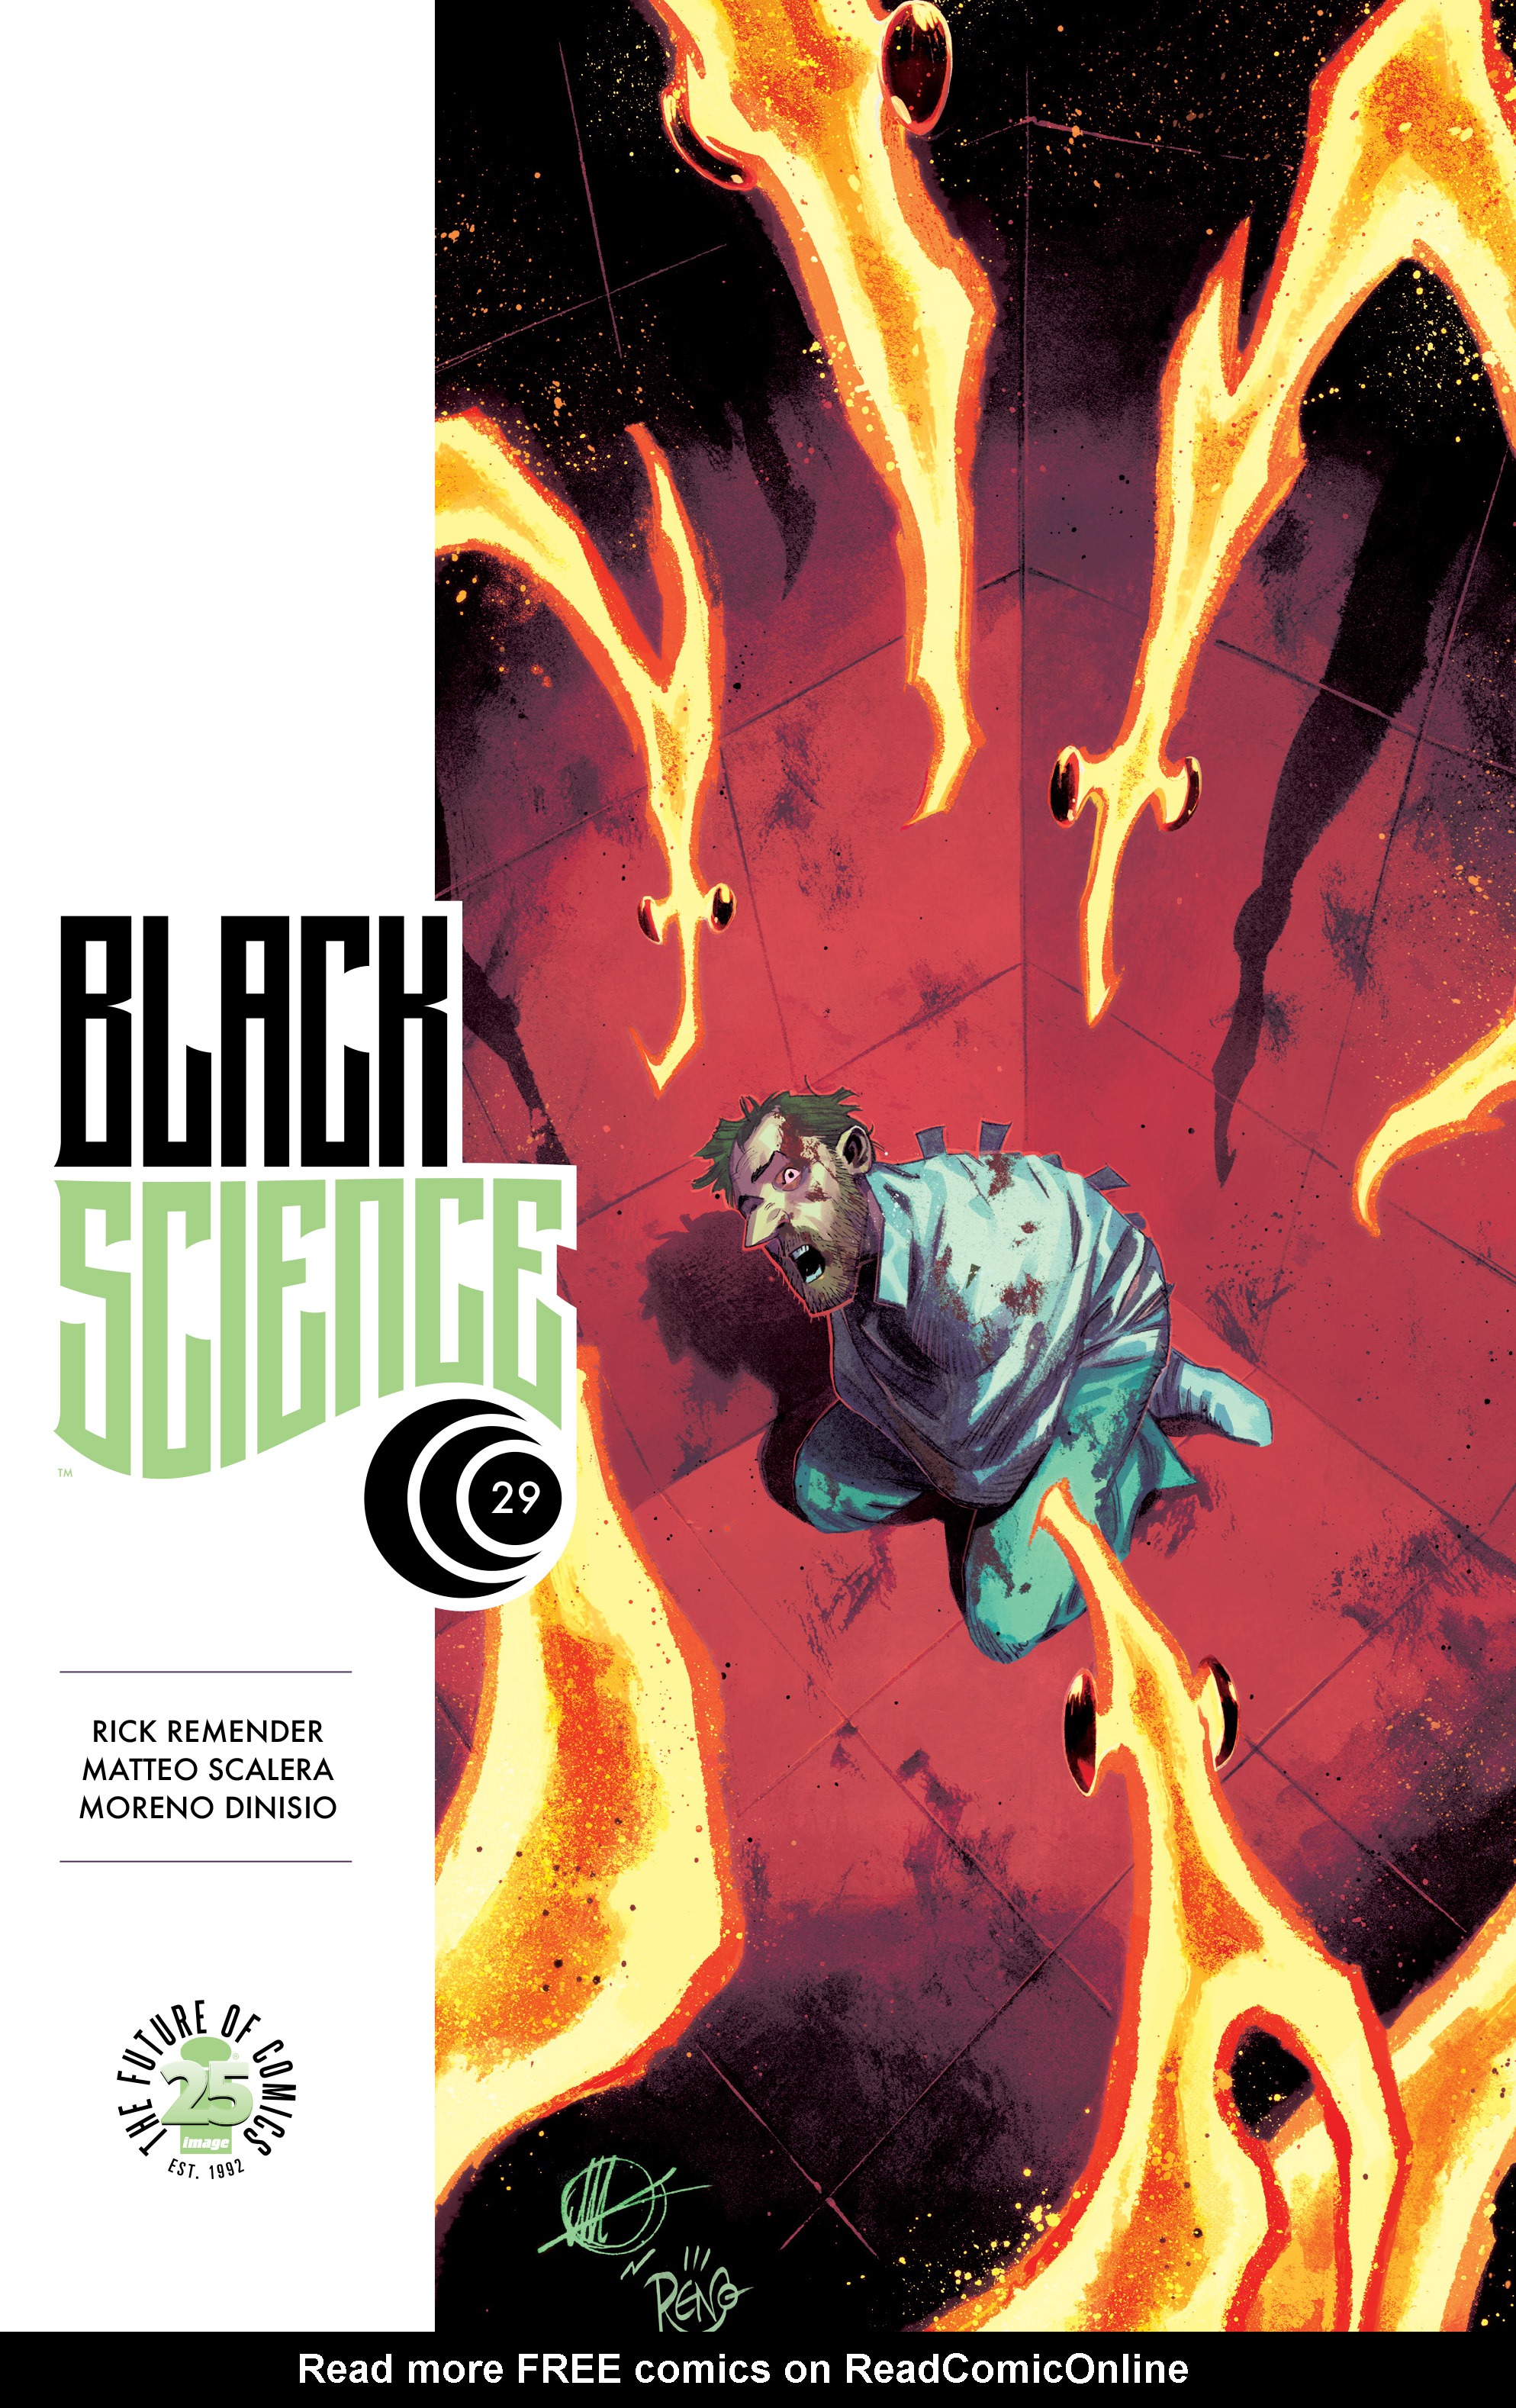 Read online Black Science comic -  Issue #29 - 1